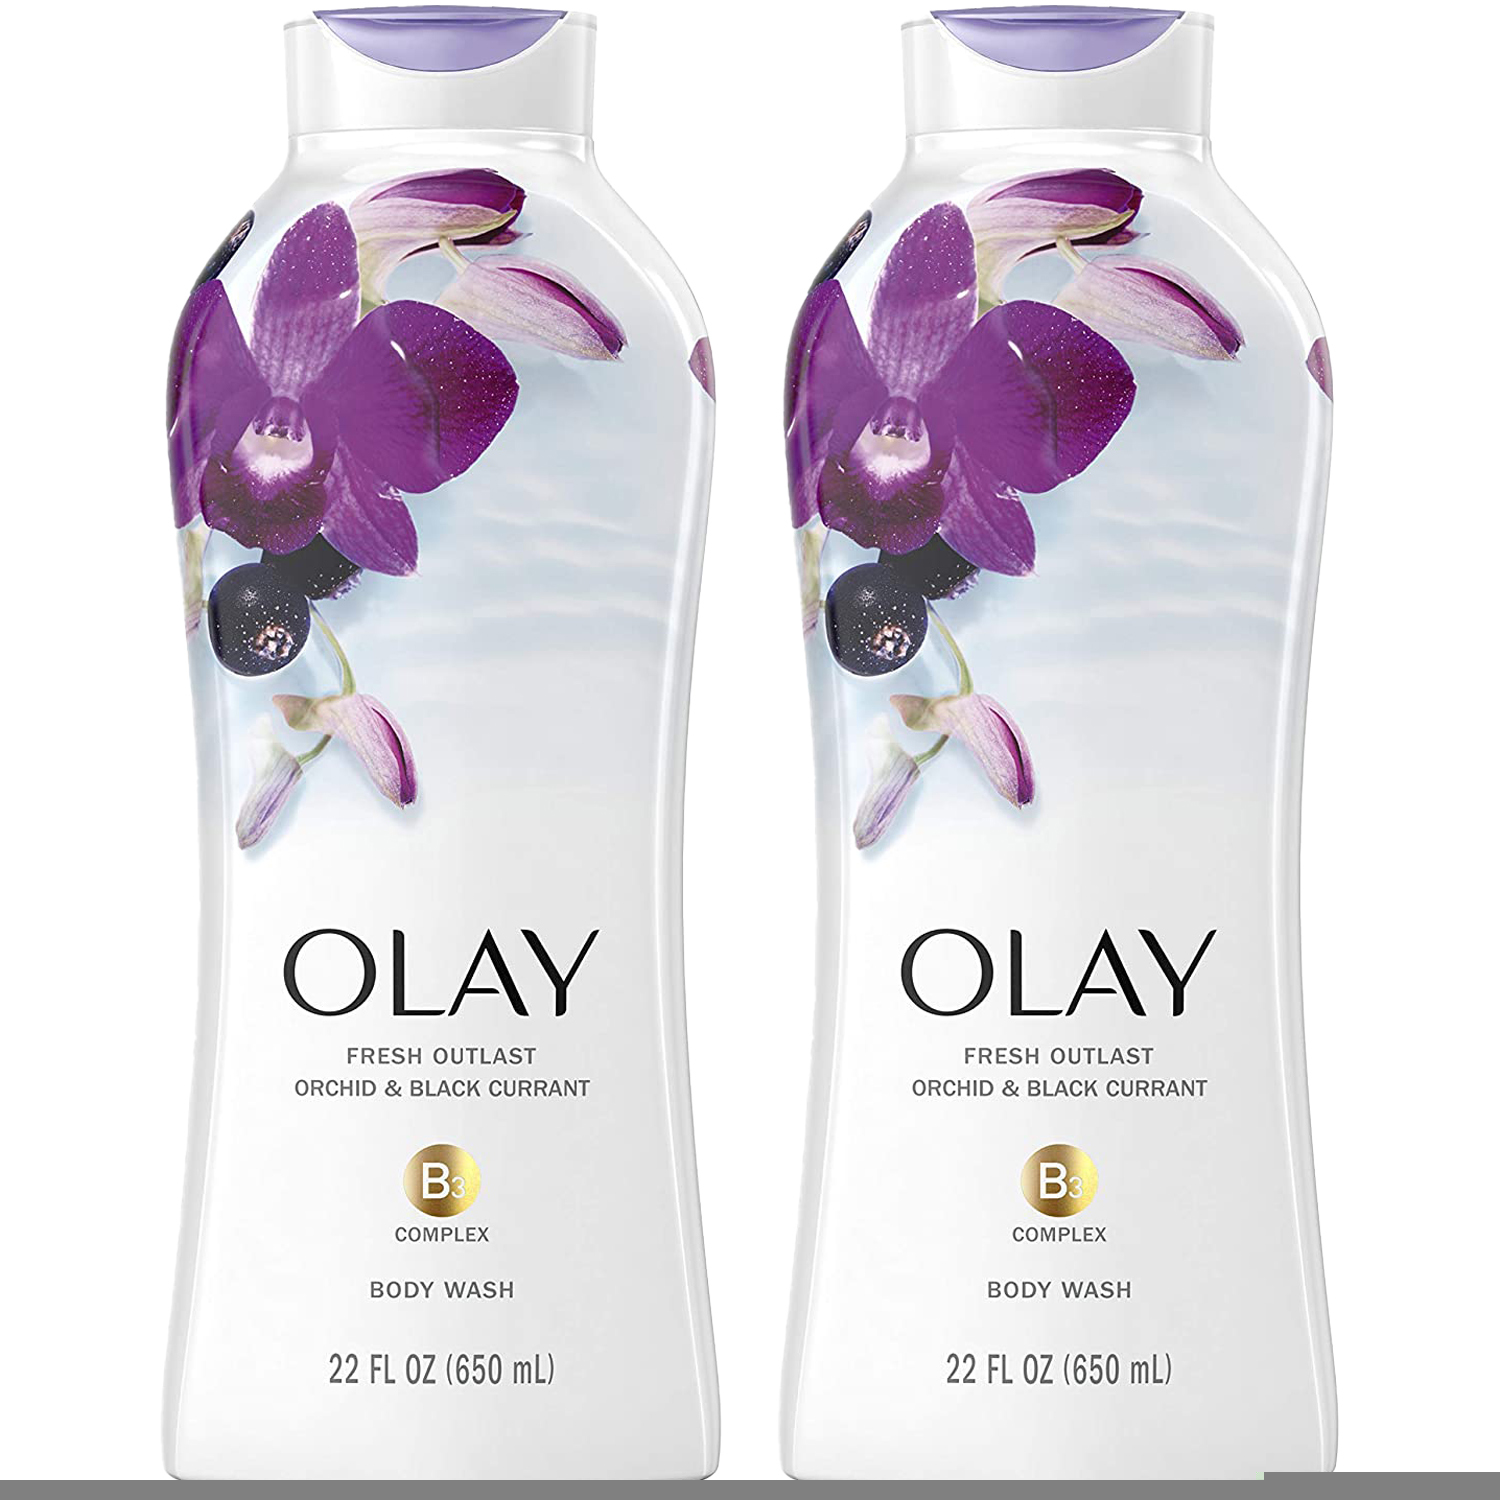 Pack of (2) New Olay Soothing Orchid 7 Black Currant Bodywash, 22 Fl Oz